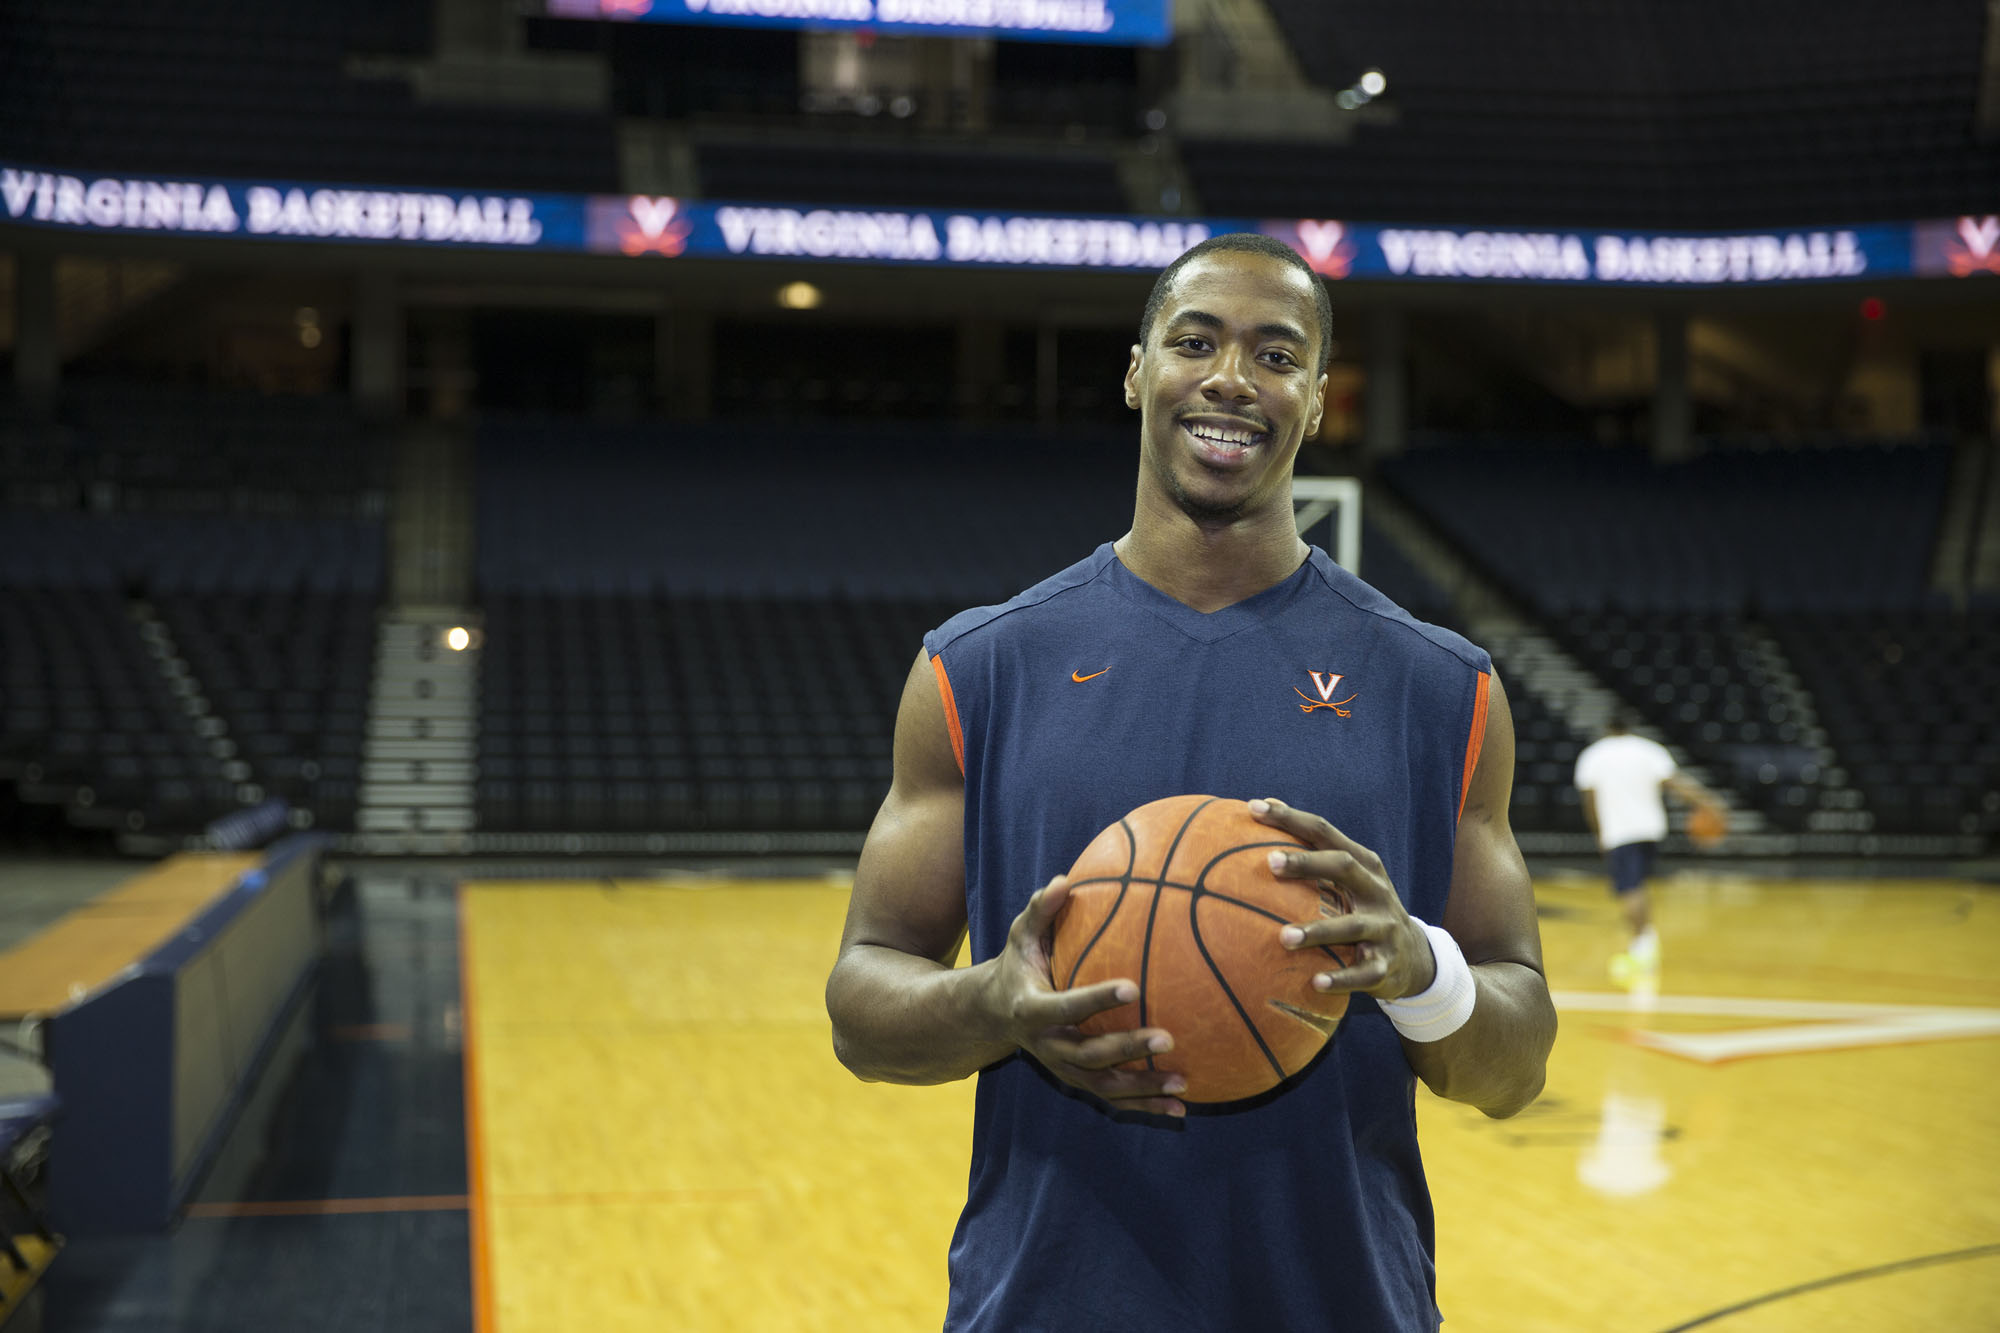 Jerome Meyinsse holding a basketball smiling at the camera